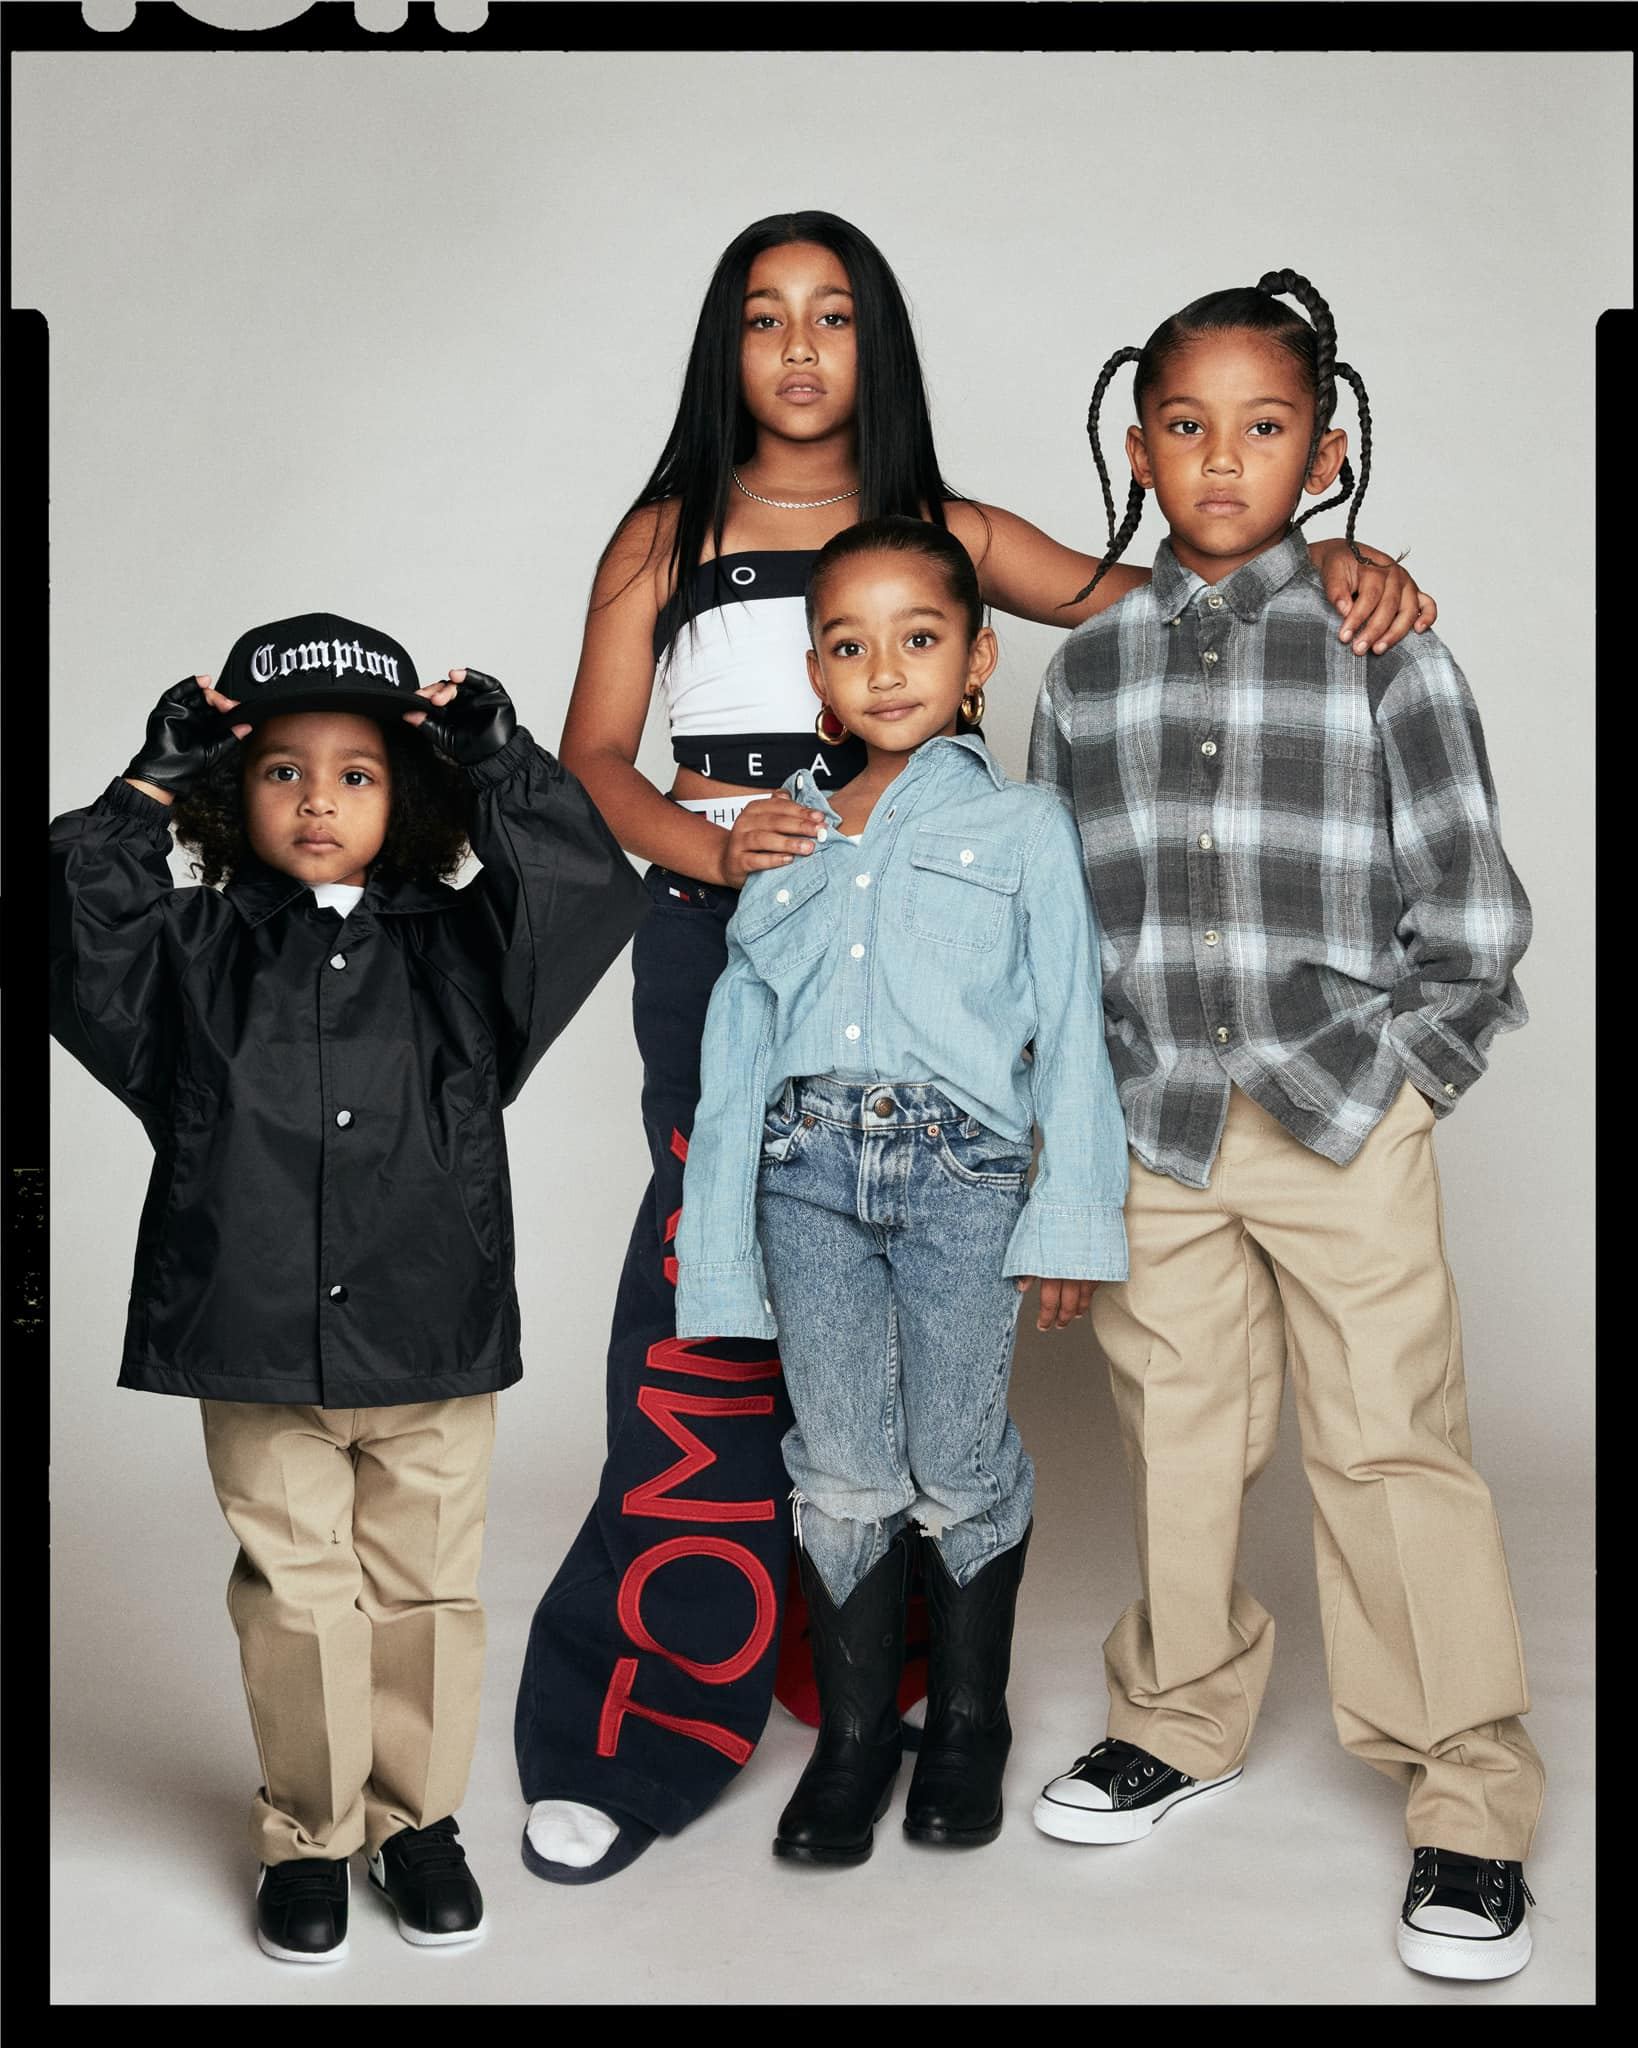 likhoa sweet chicago west next to kim kardashian and her siblings in a family photo set that makes the online community constantly praise 6539def43032c Sweet Chicago West Next To Kim Kardashian And Her Siblings In A Family Photo Set That Makes The Online Community Constantly Praise